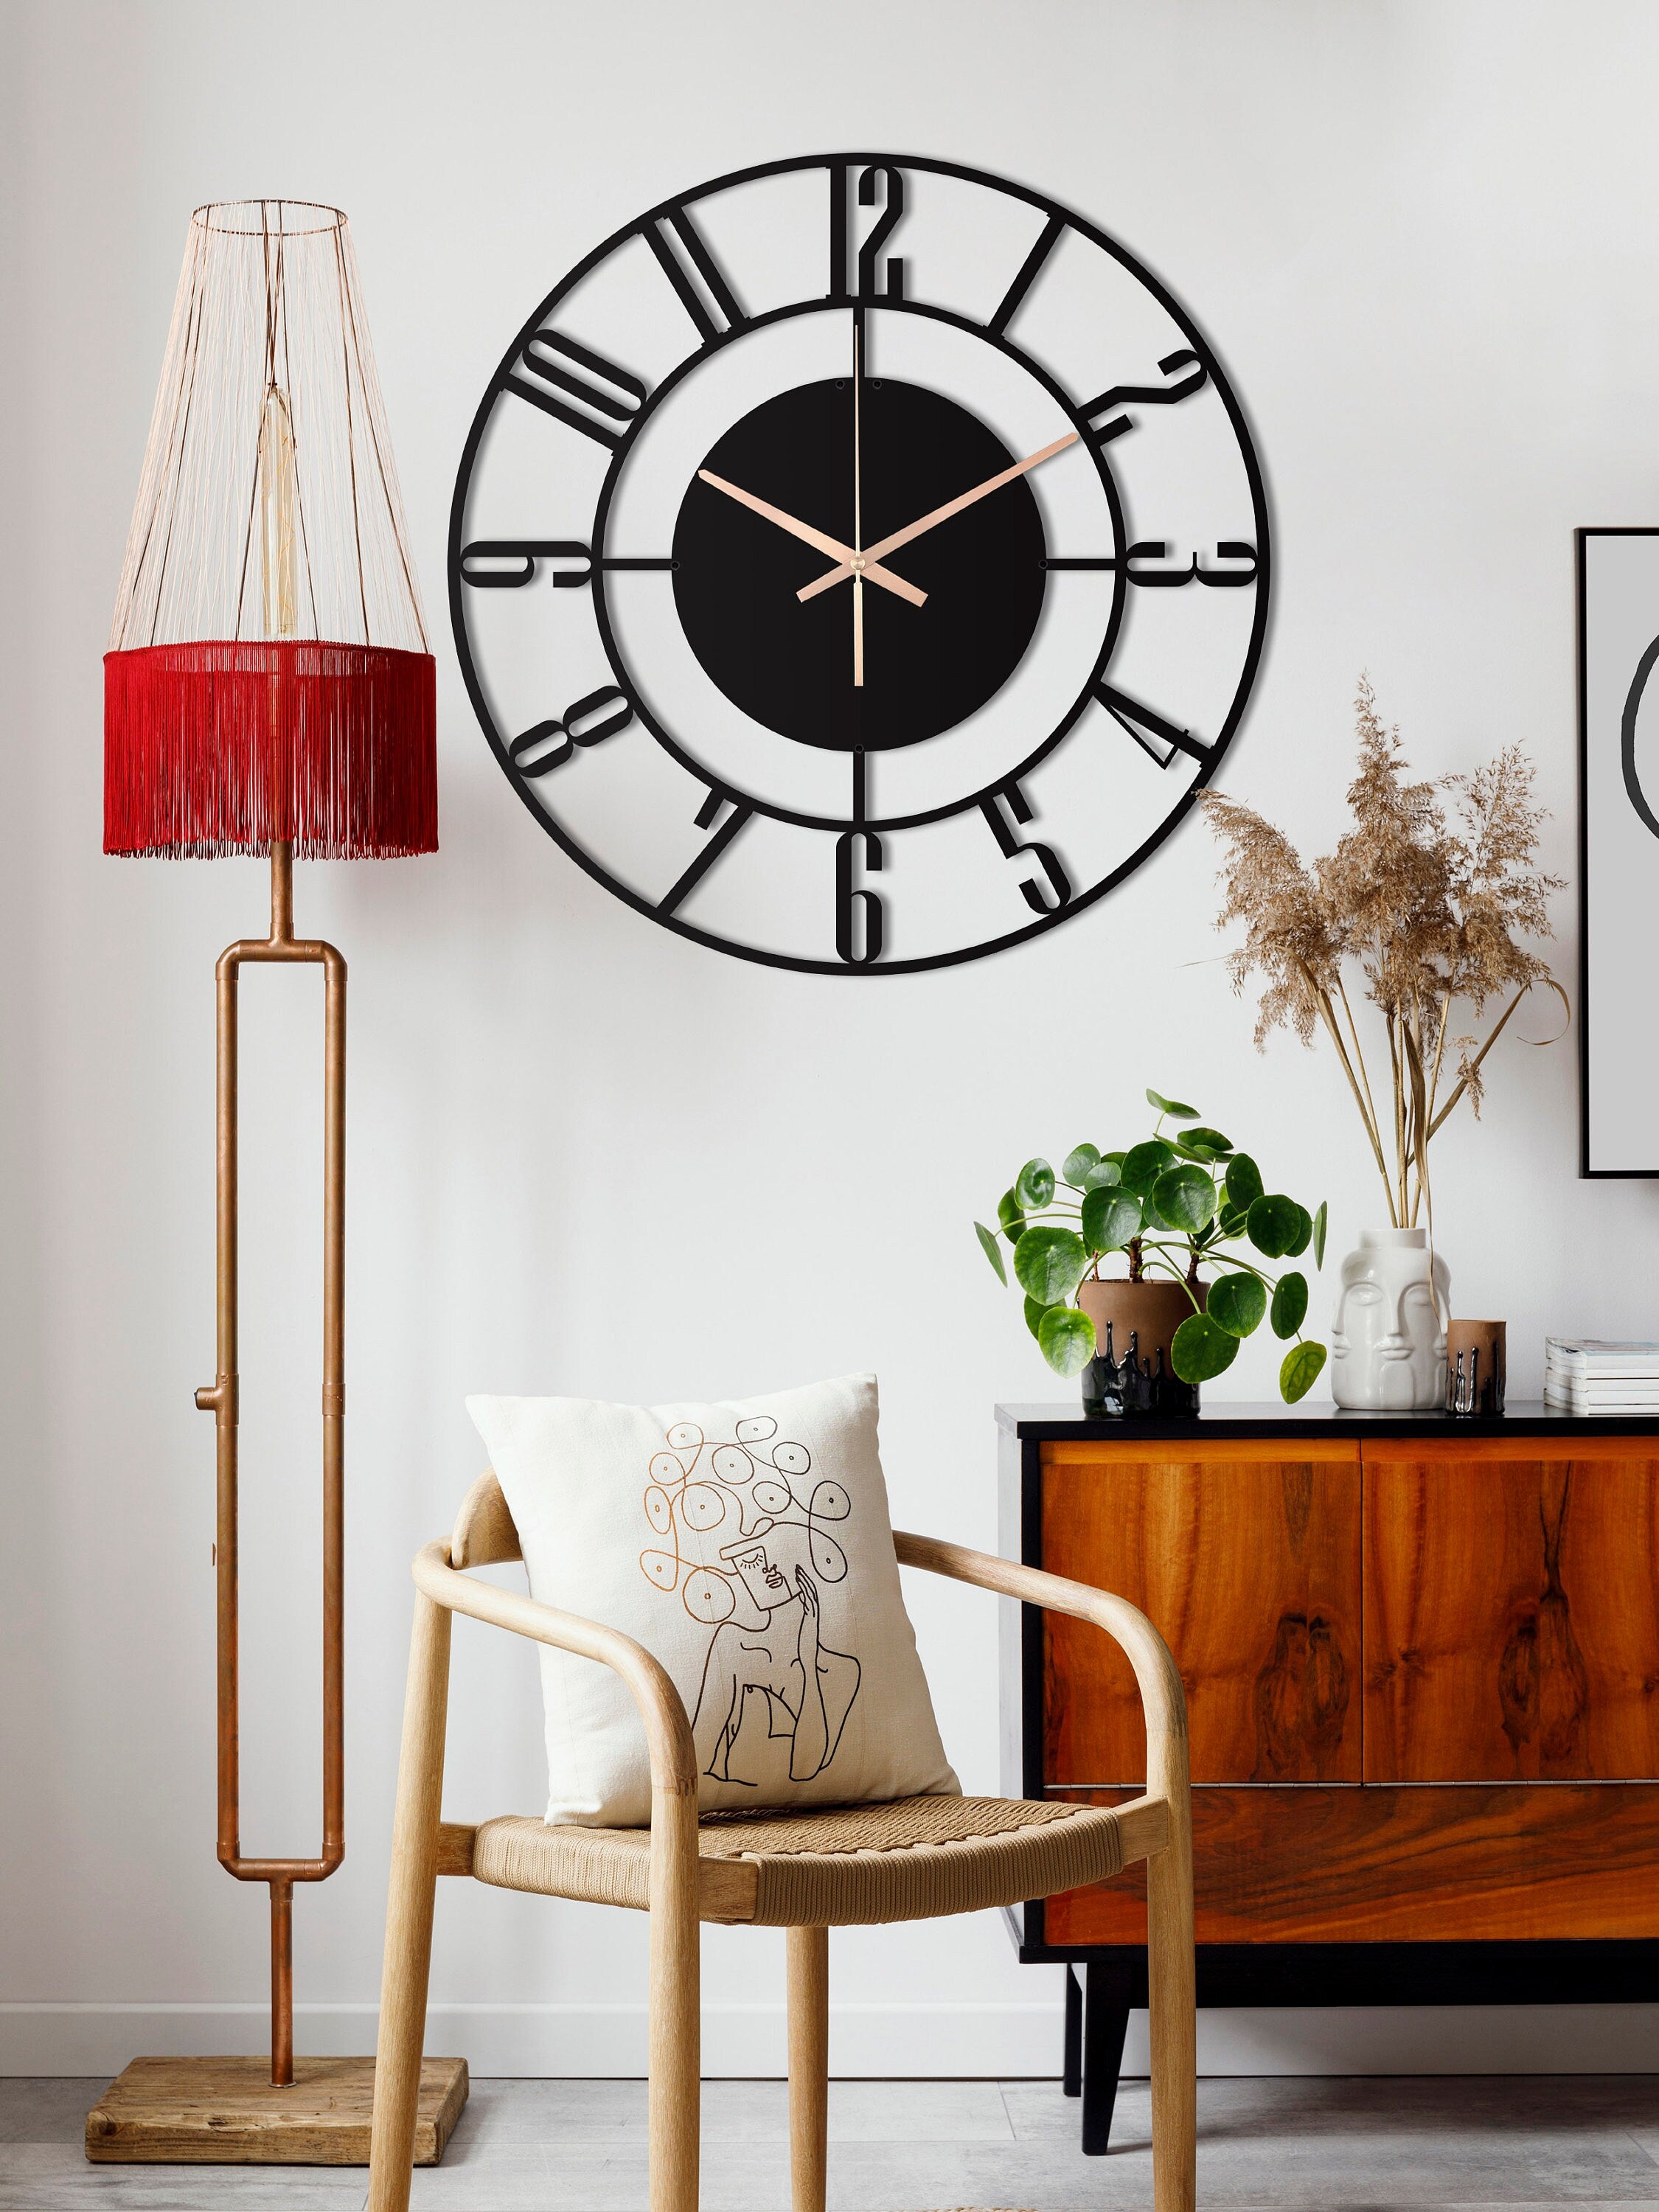 Unique Wall Clock, New Home Gift, Small Wall Clock, Silent Wall Clock, Oversized Wall Clock, Decorative Clocks For Wall, Laser Cut Clock